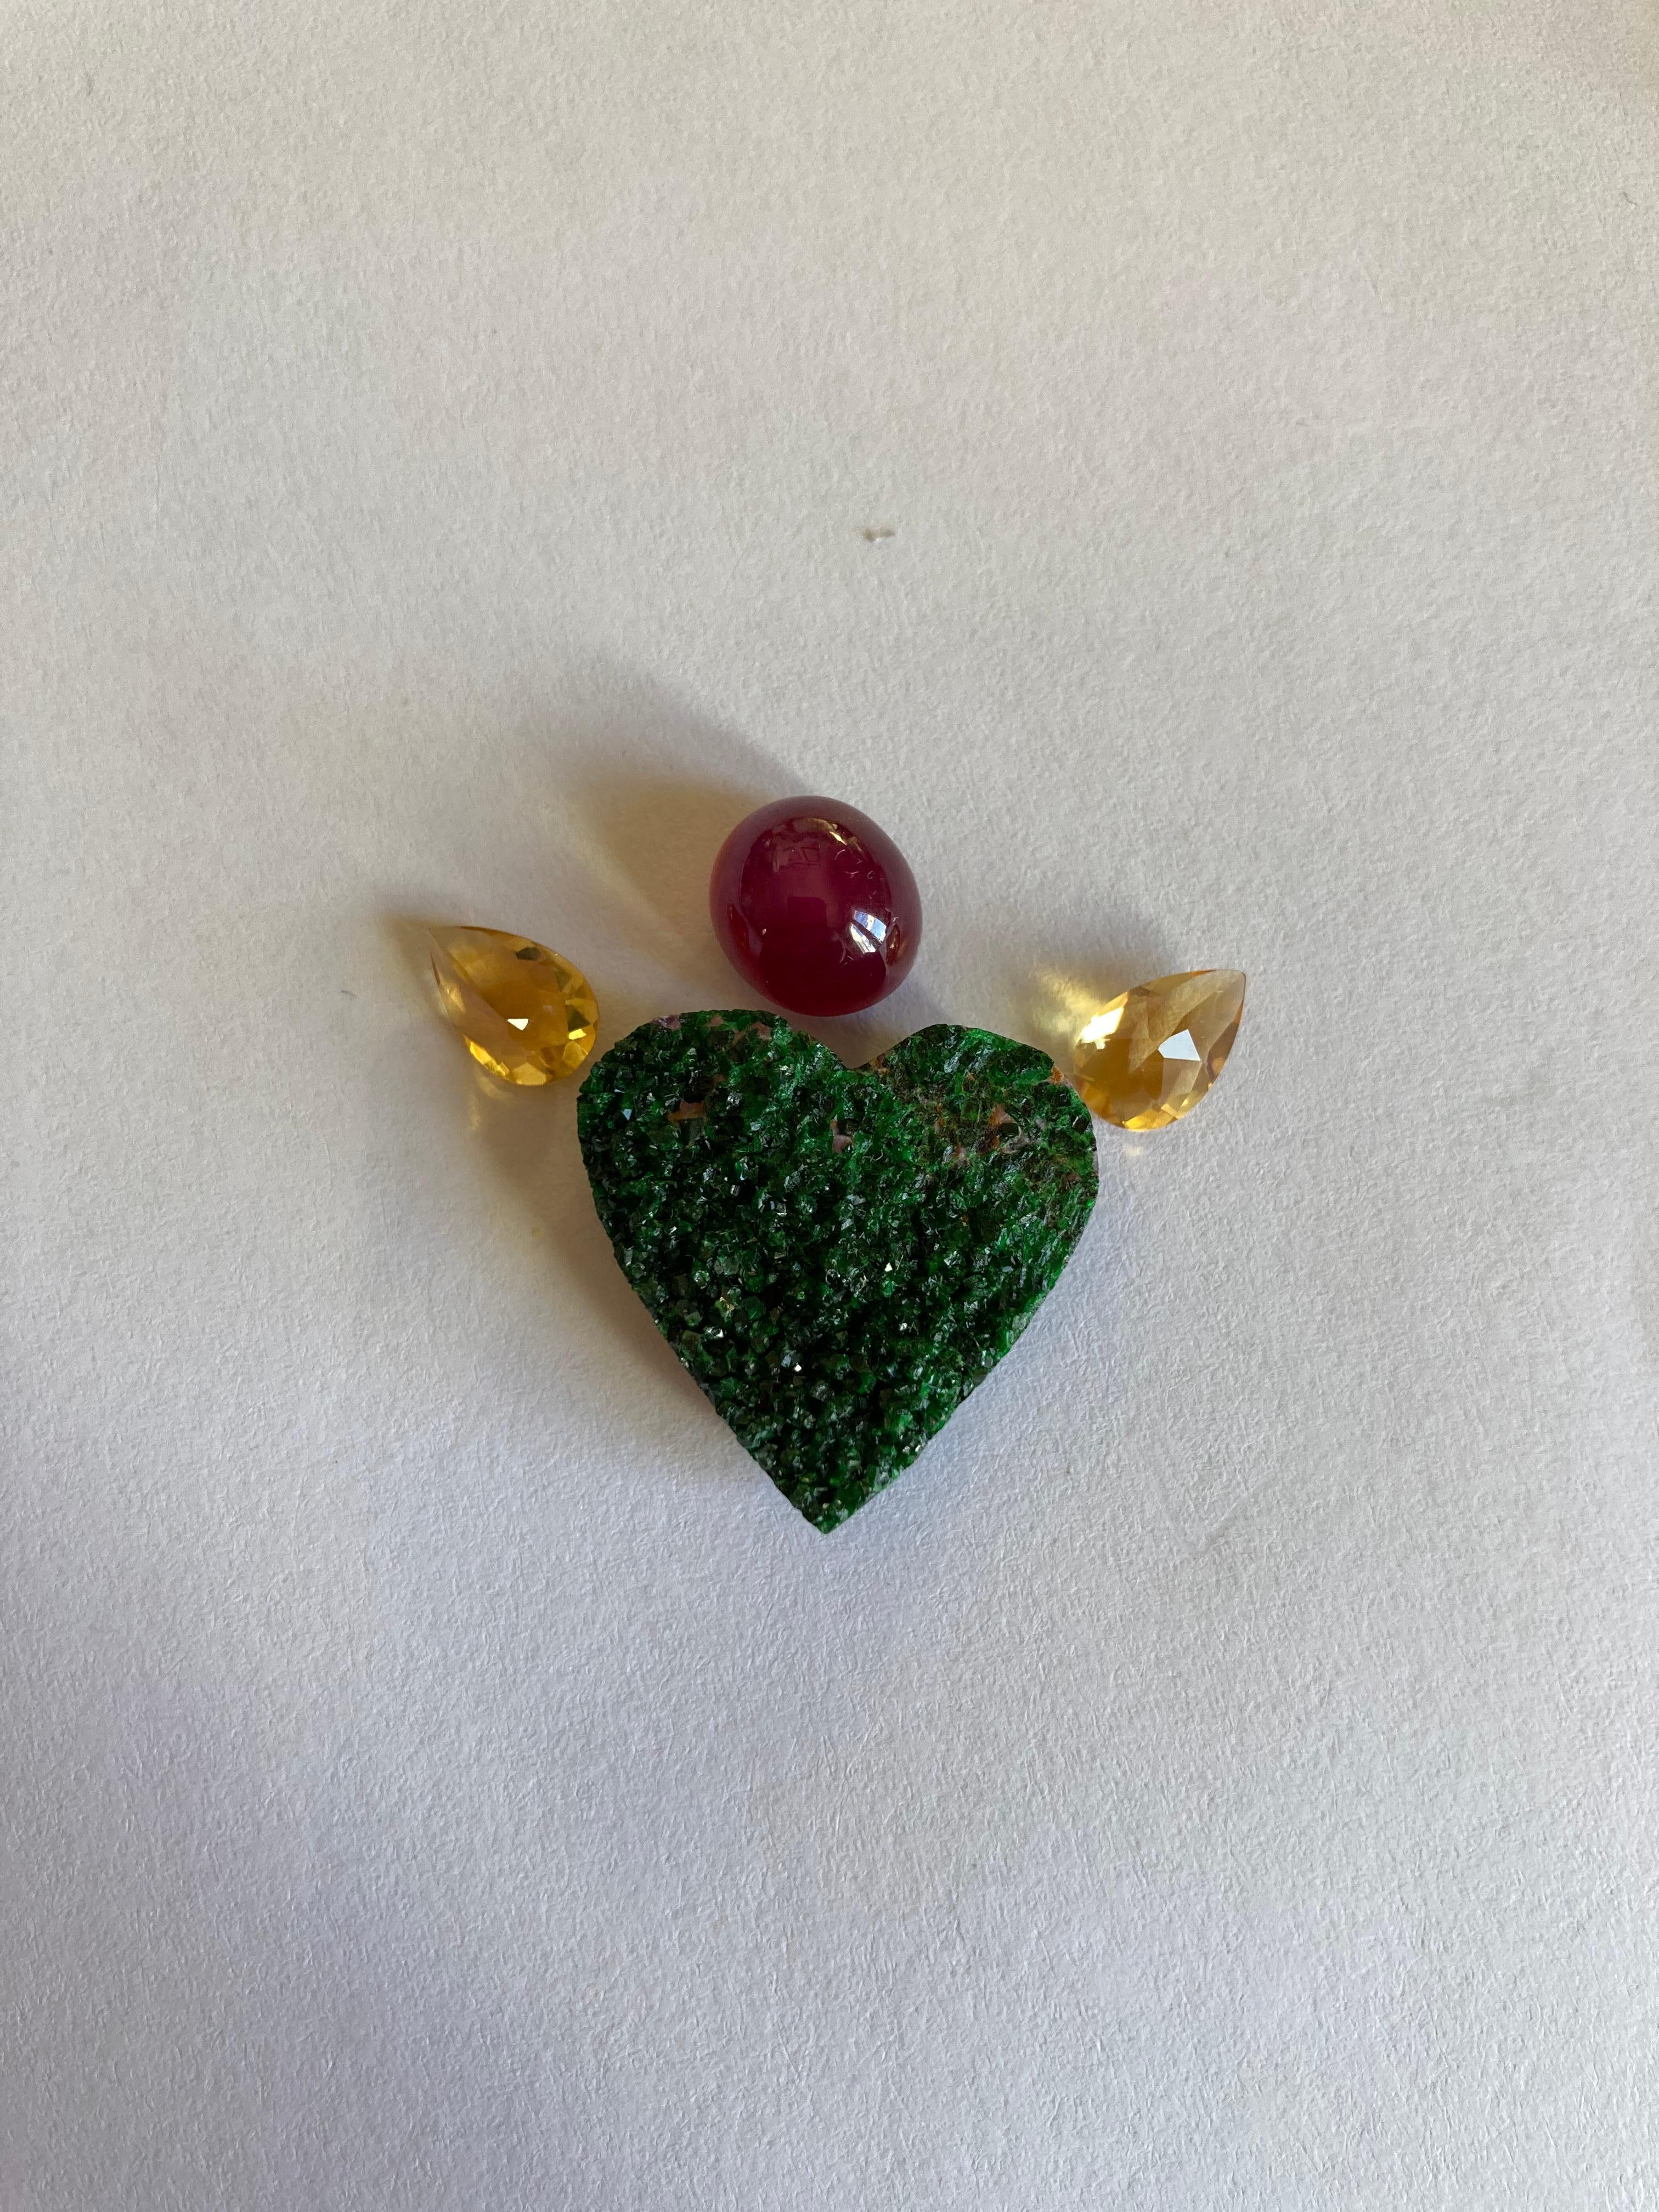 Heart Cut Green Granat Heart Necklace with Star Ruby Cabochon and Citrine Original Design For Sale